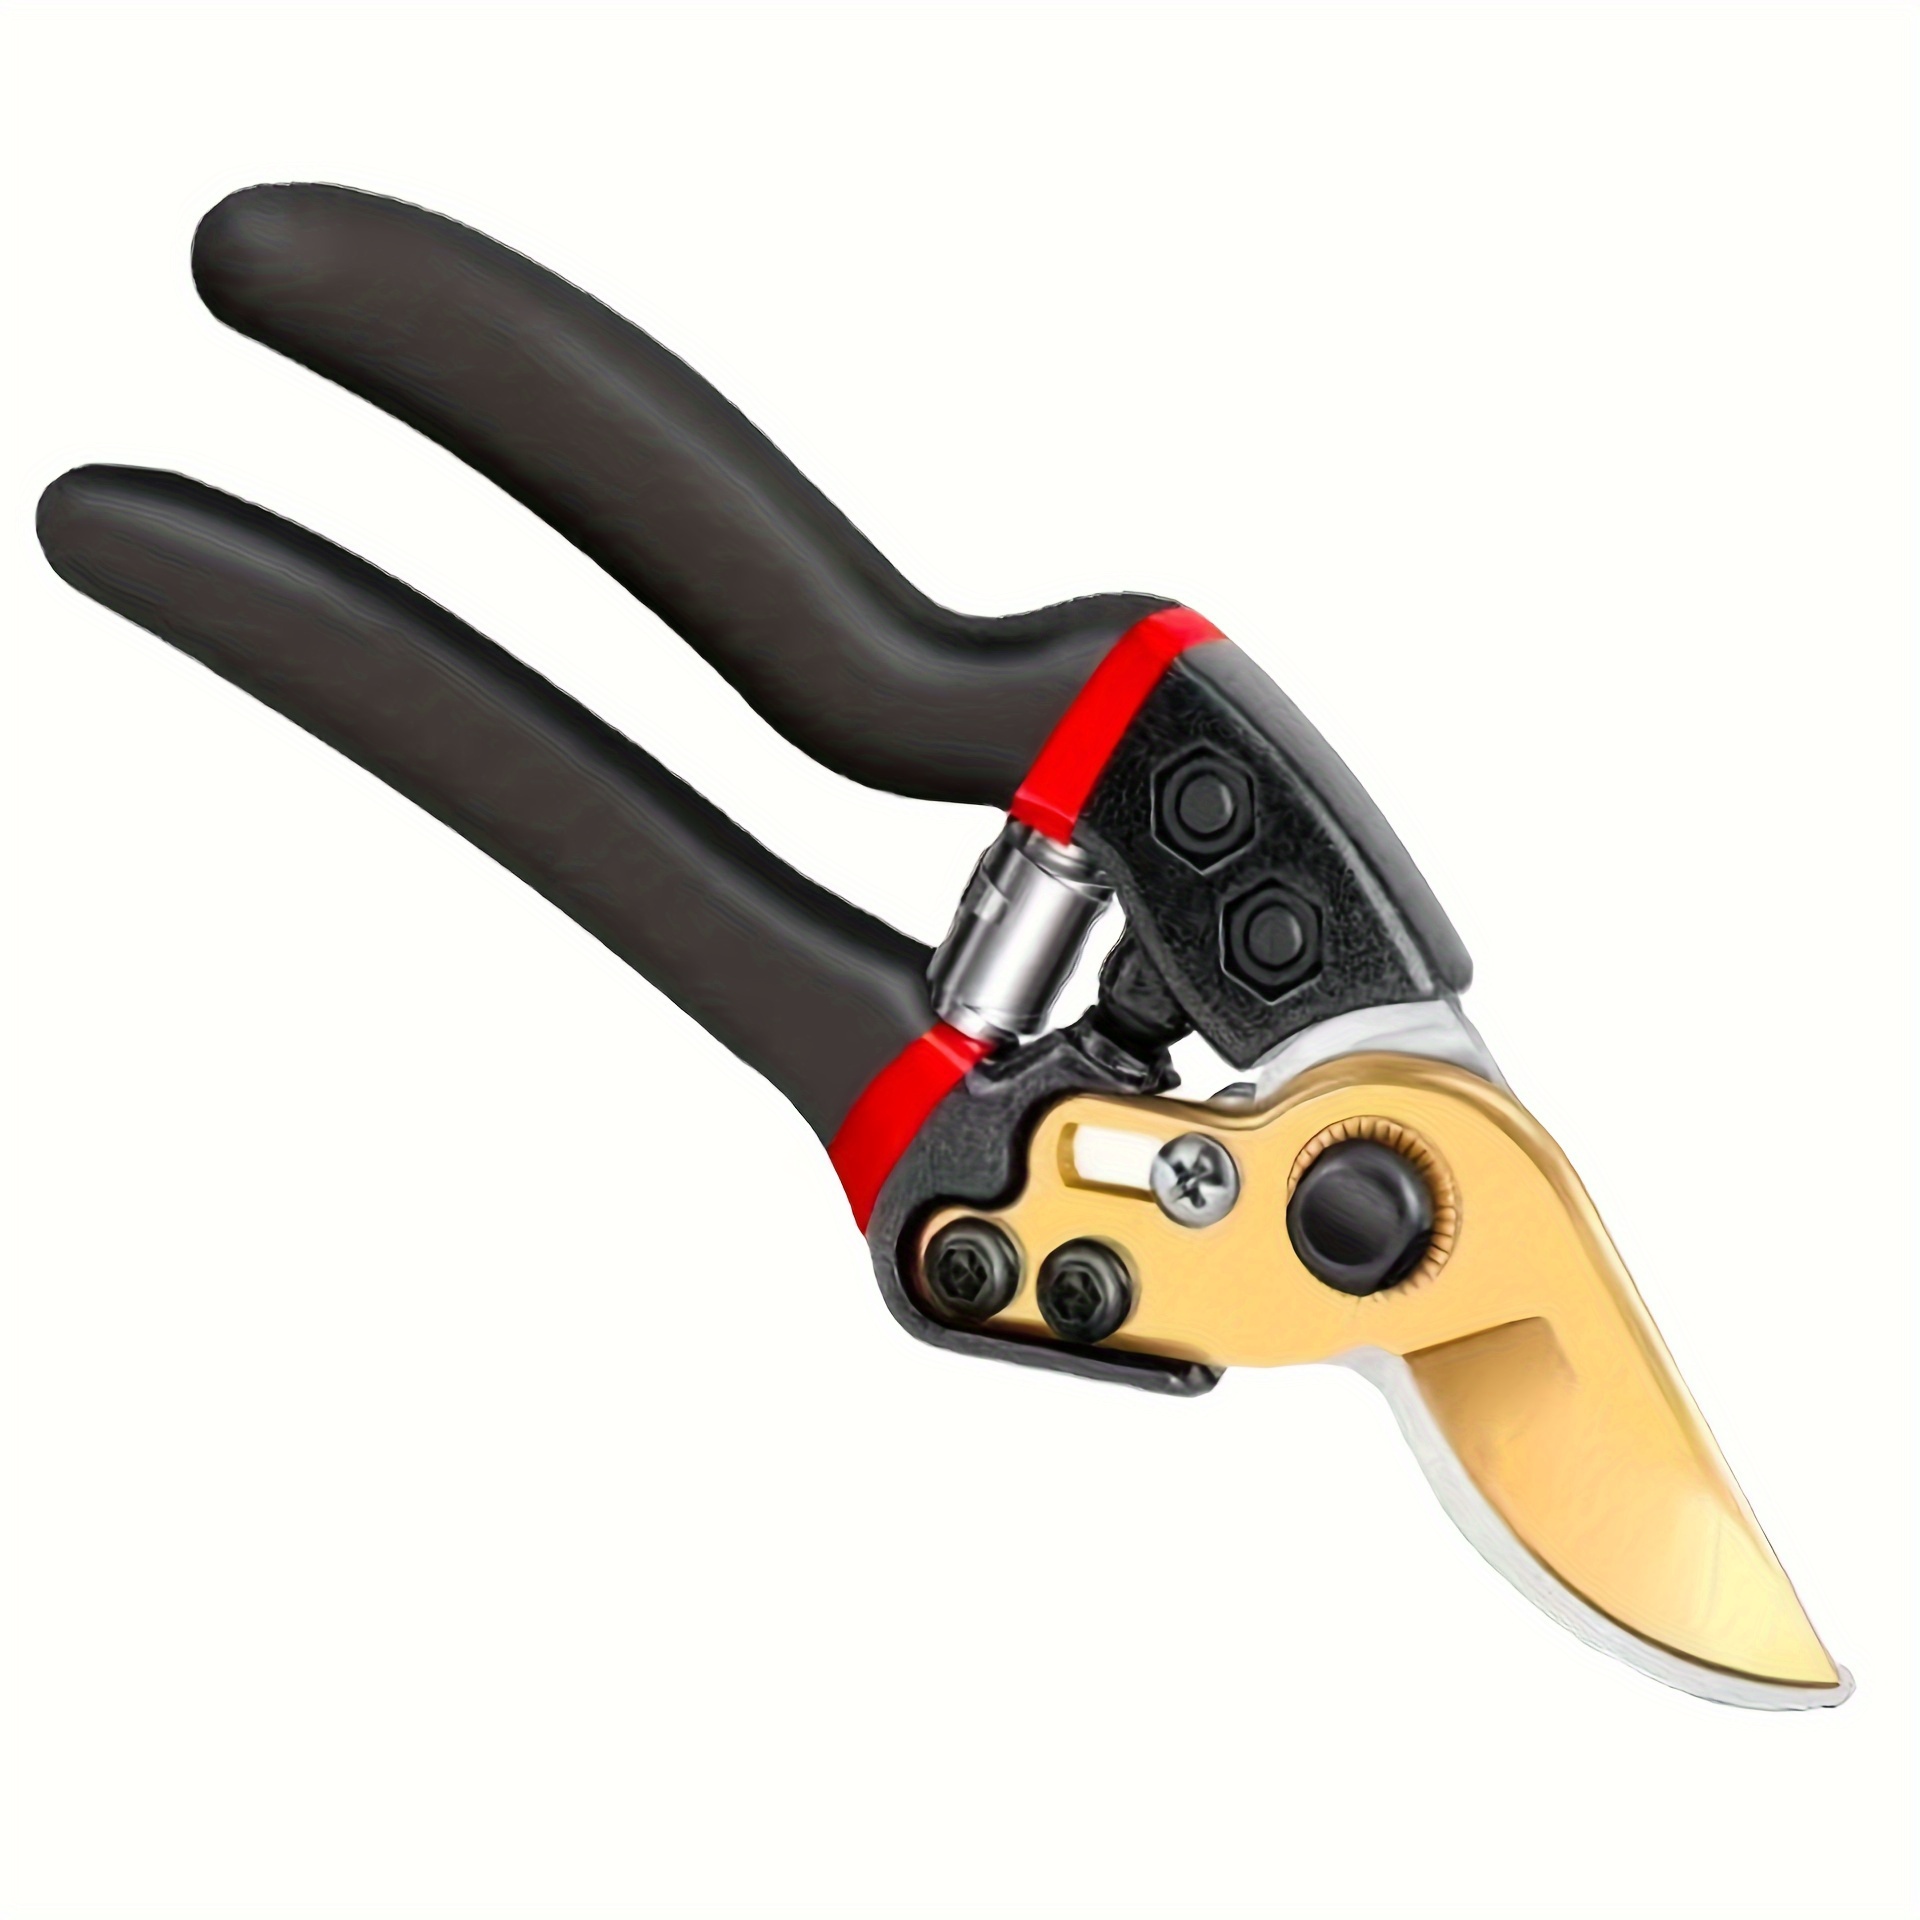 

2-piece Set: Ergonomic Spring Pruning Shears For Weak Hands - Ideal For Gardening & Bonsai, Includes Thick Branch Cutter & File